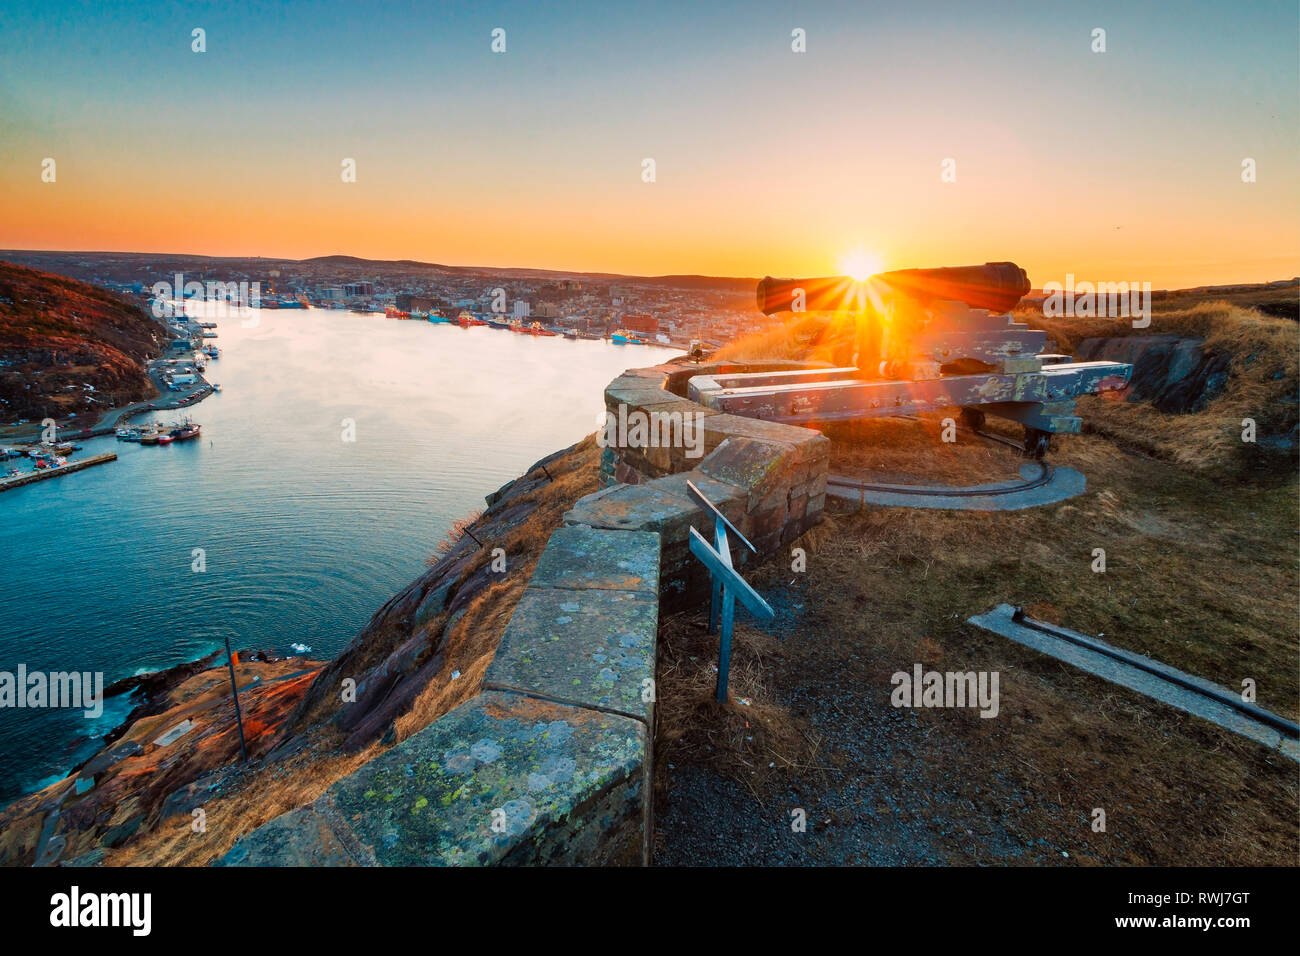 view of the sun setting behind the city of St. John's from the Queens Battery, Signal Hill National Historic Site, St. John's, Newfoundland and Labrador Stock Photo